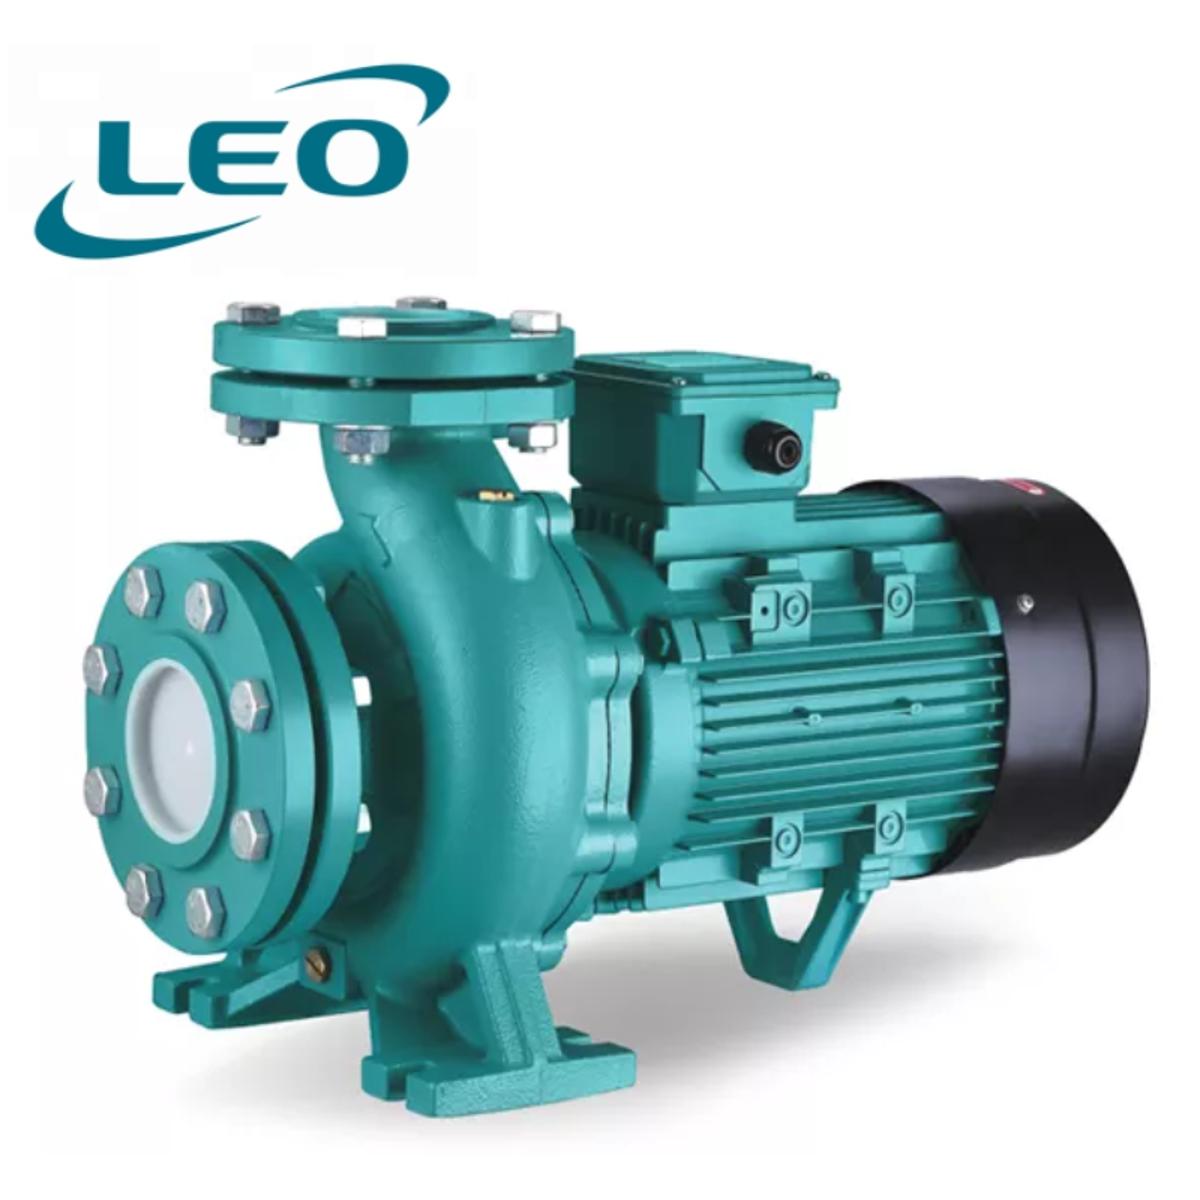 LEO - XST-65-125-40 - 4000 W - 5.5 HP - Clean Water HEAVY DUTY Centrifugal Pump With FLANGES  - 380V~400V THREE PHASE - SIZE :- 3" x 2 1-2 " - European STANDARD